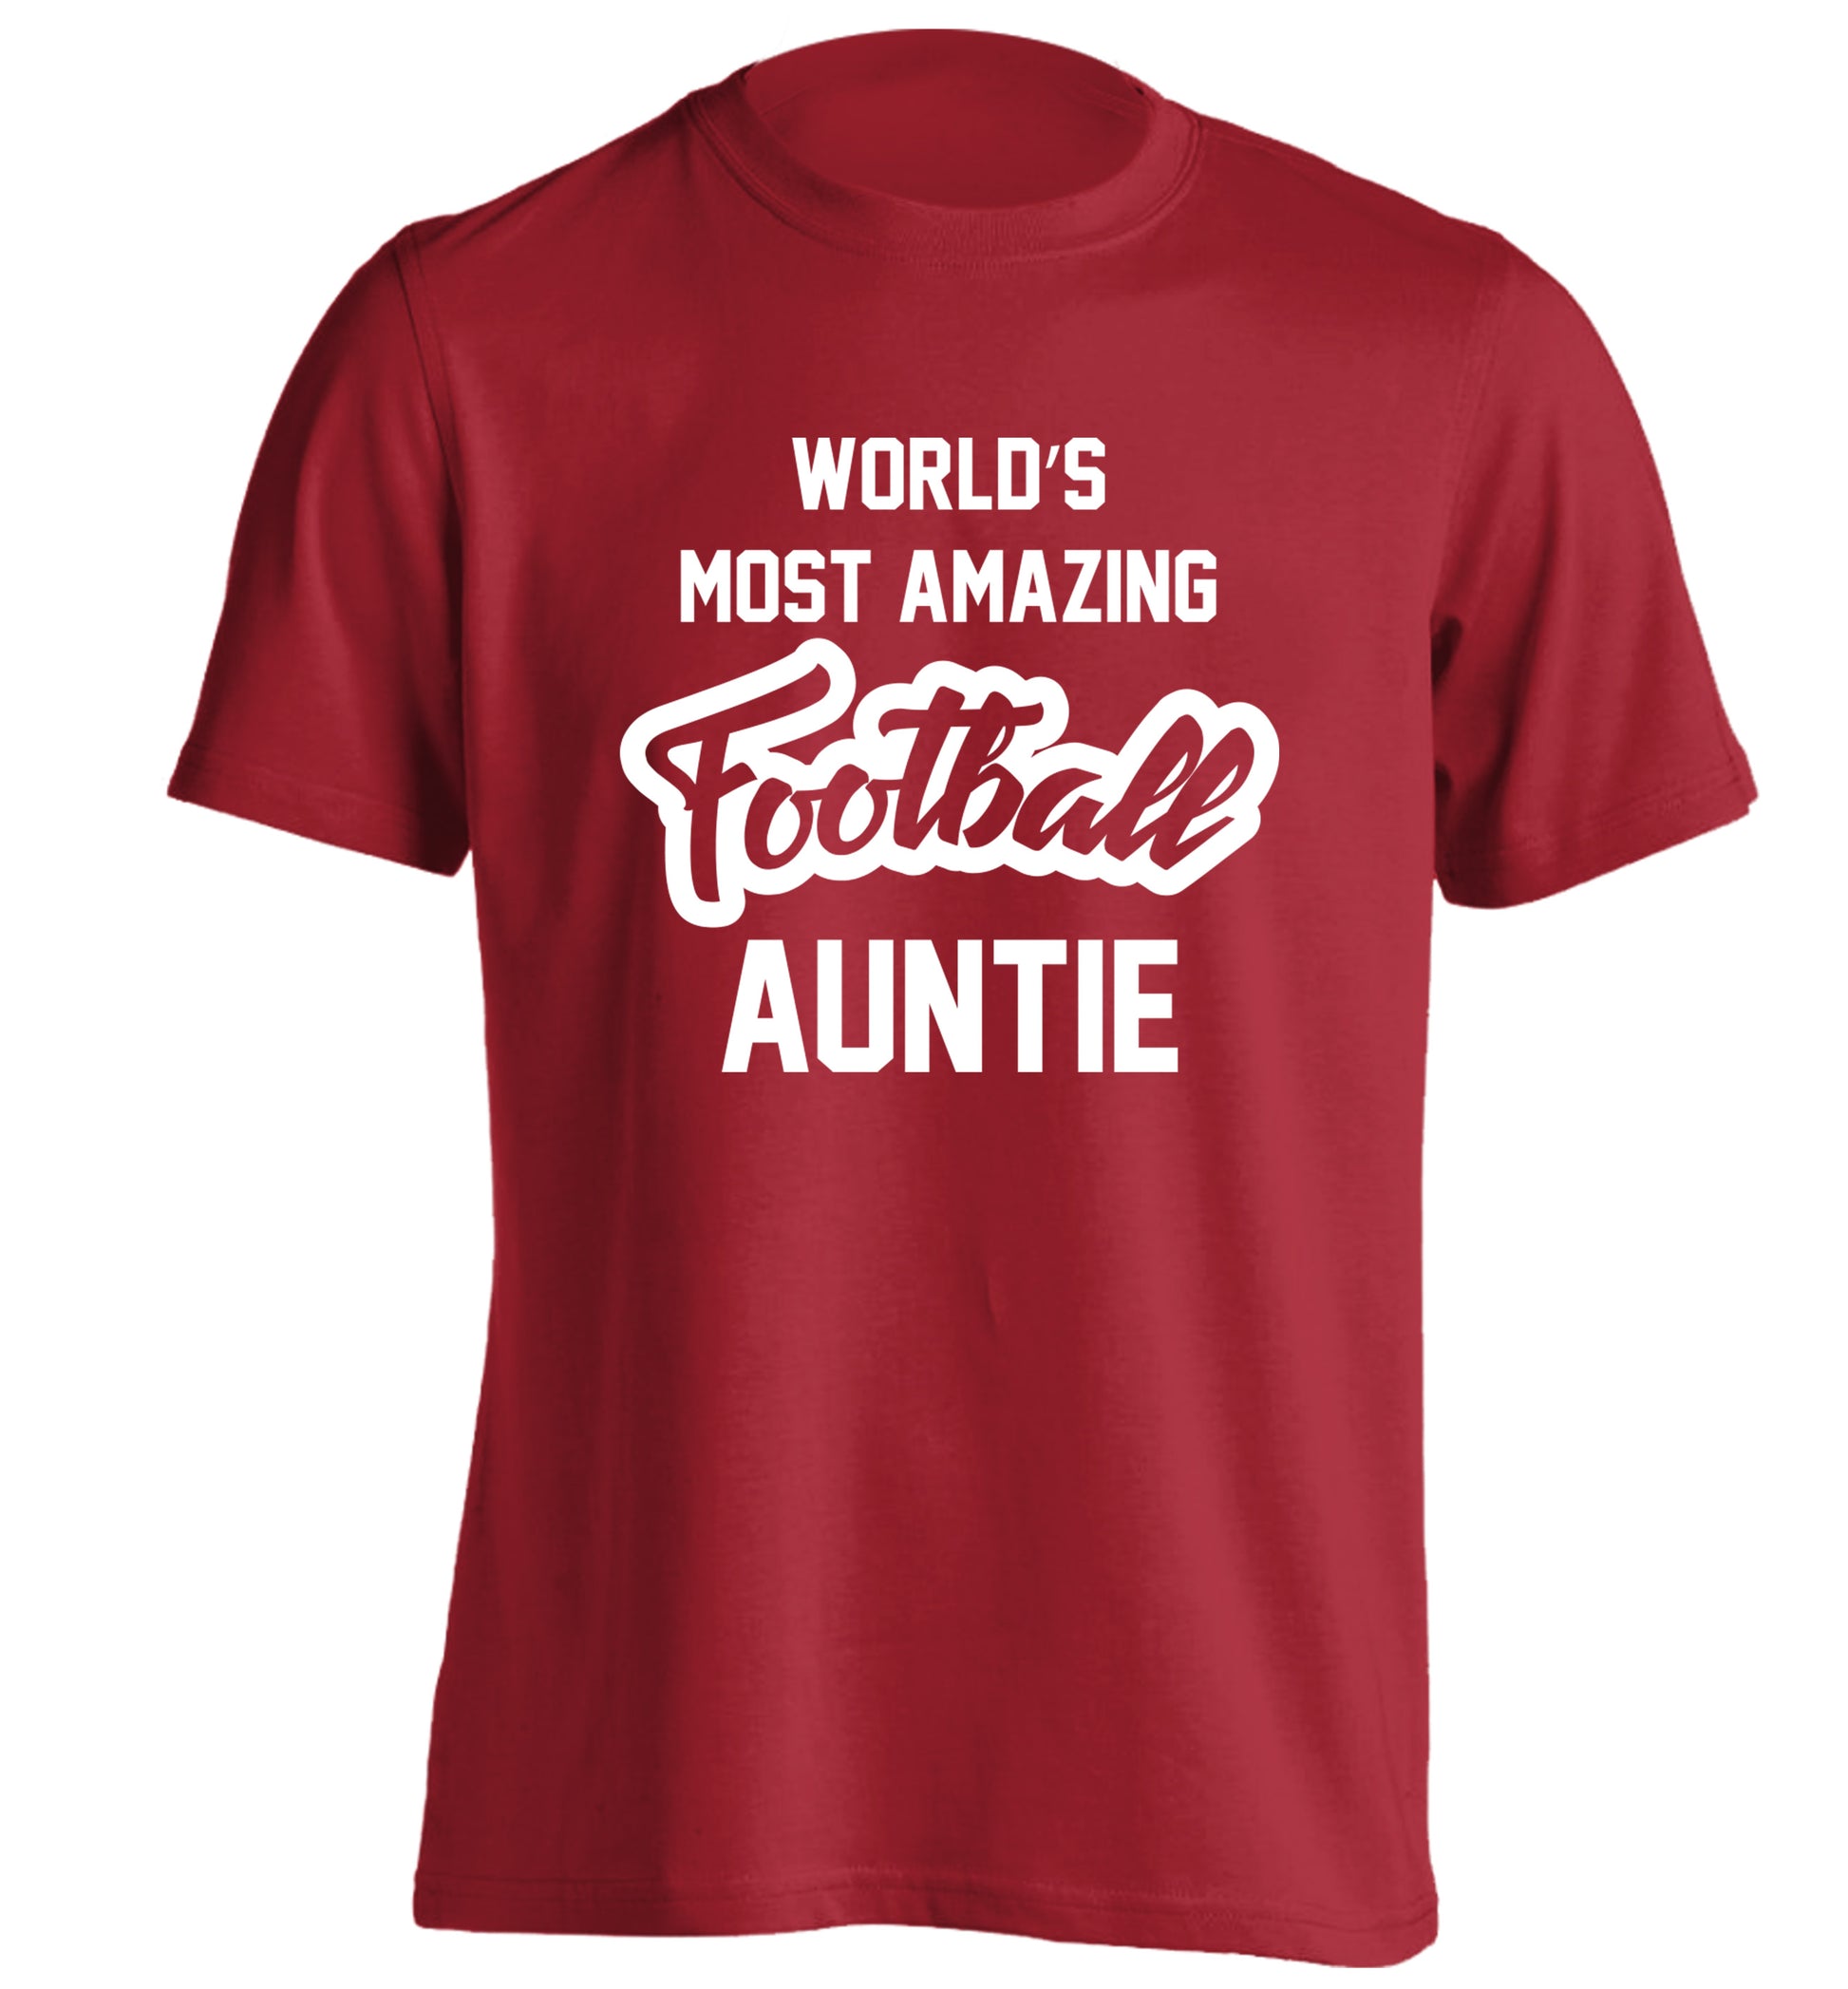 Worlds most amazing football auntie adults unisexred Tshirt 2XL